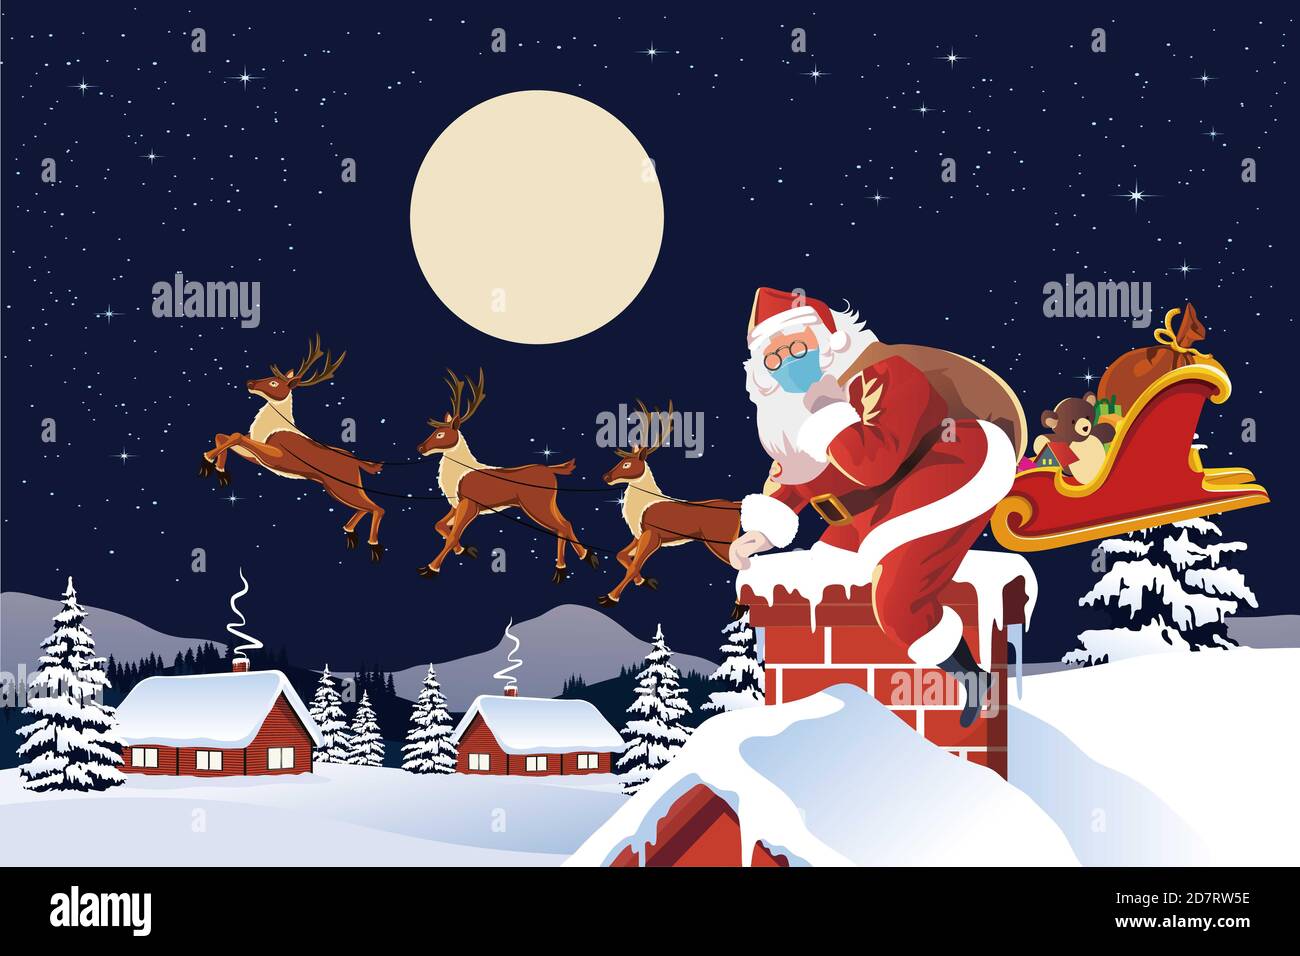 vector of santa claus arriving by sleigh ready to go down chimney Stock Photo